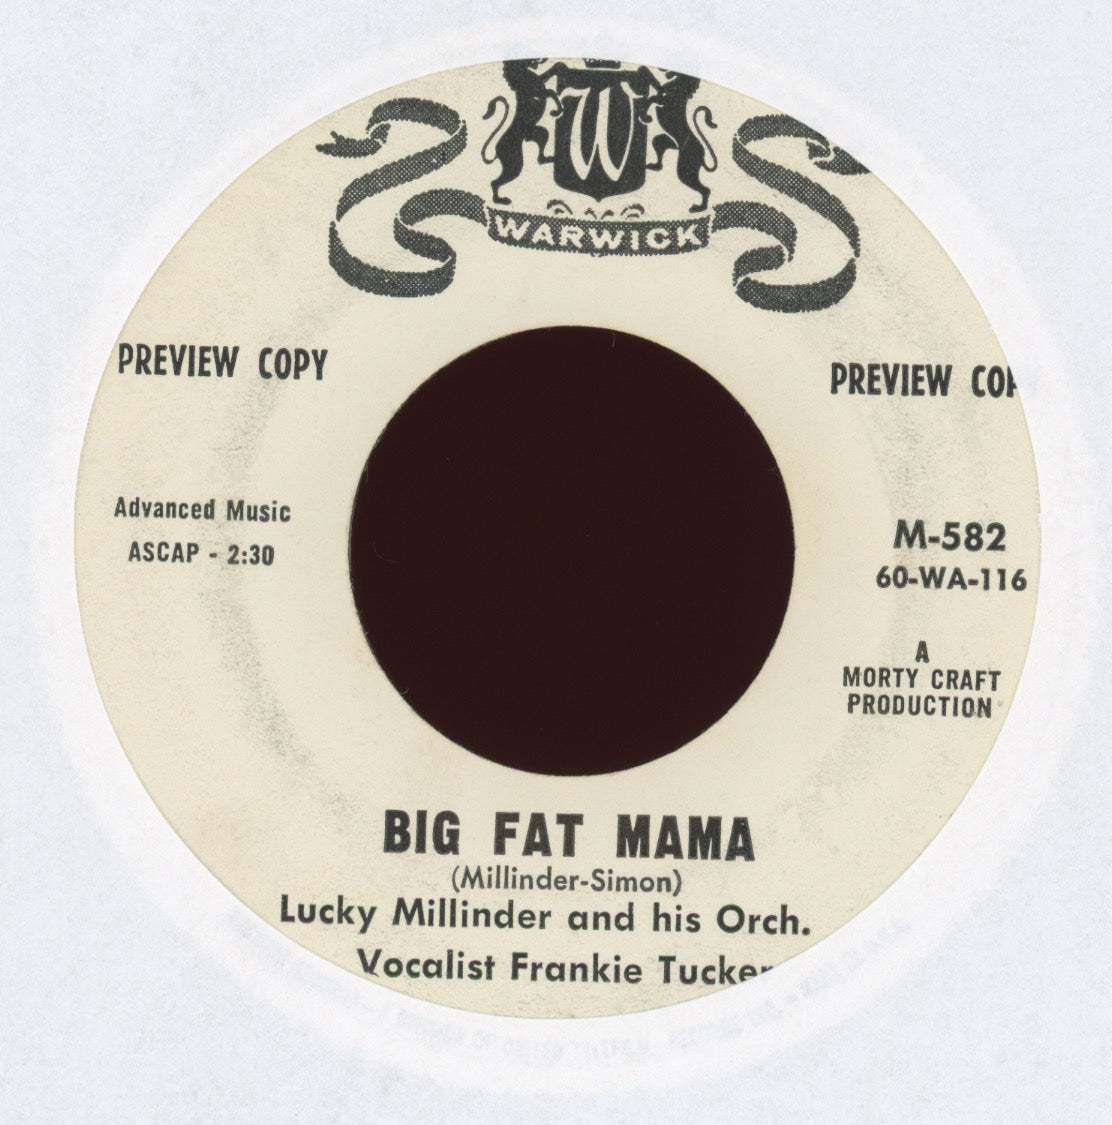 Lucky Millinder And His Orchestra - Big Fat Mama on Warwick Promo